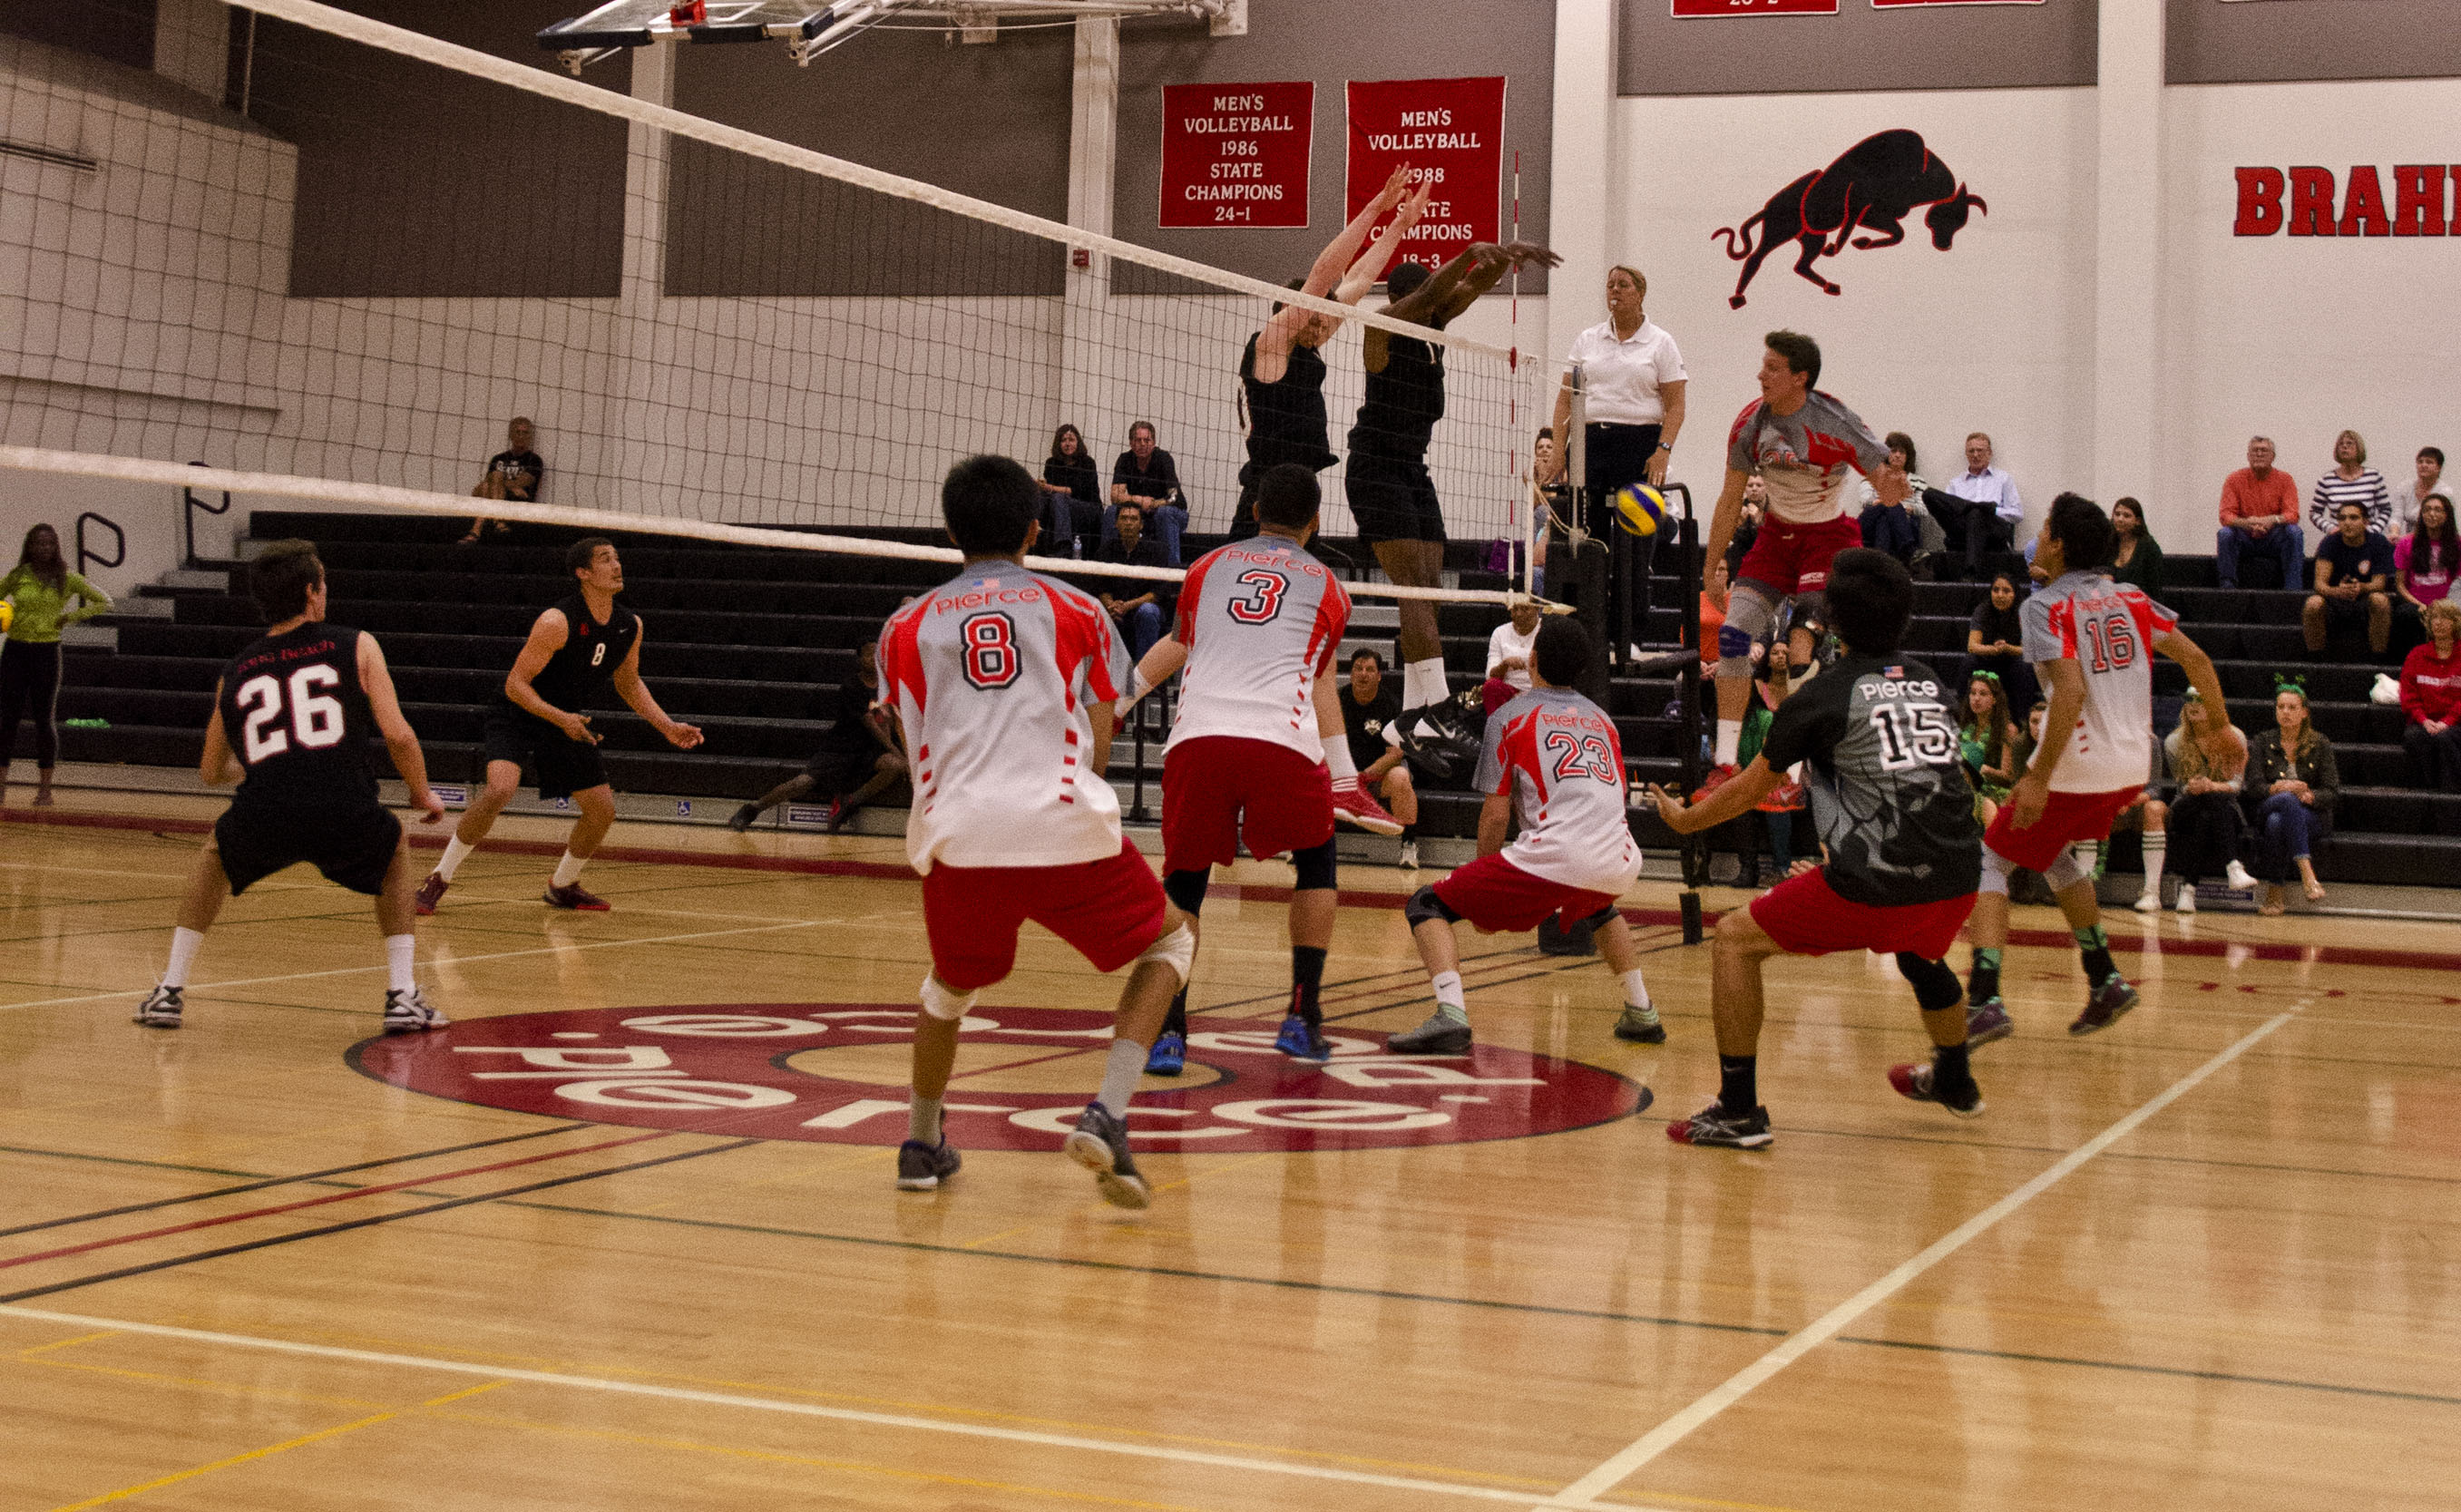 Men’s volleyball team lose in straight sets against Long Beach